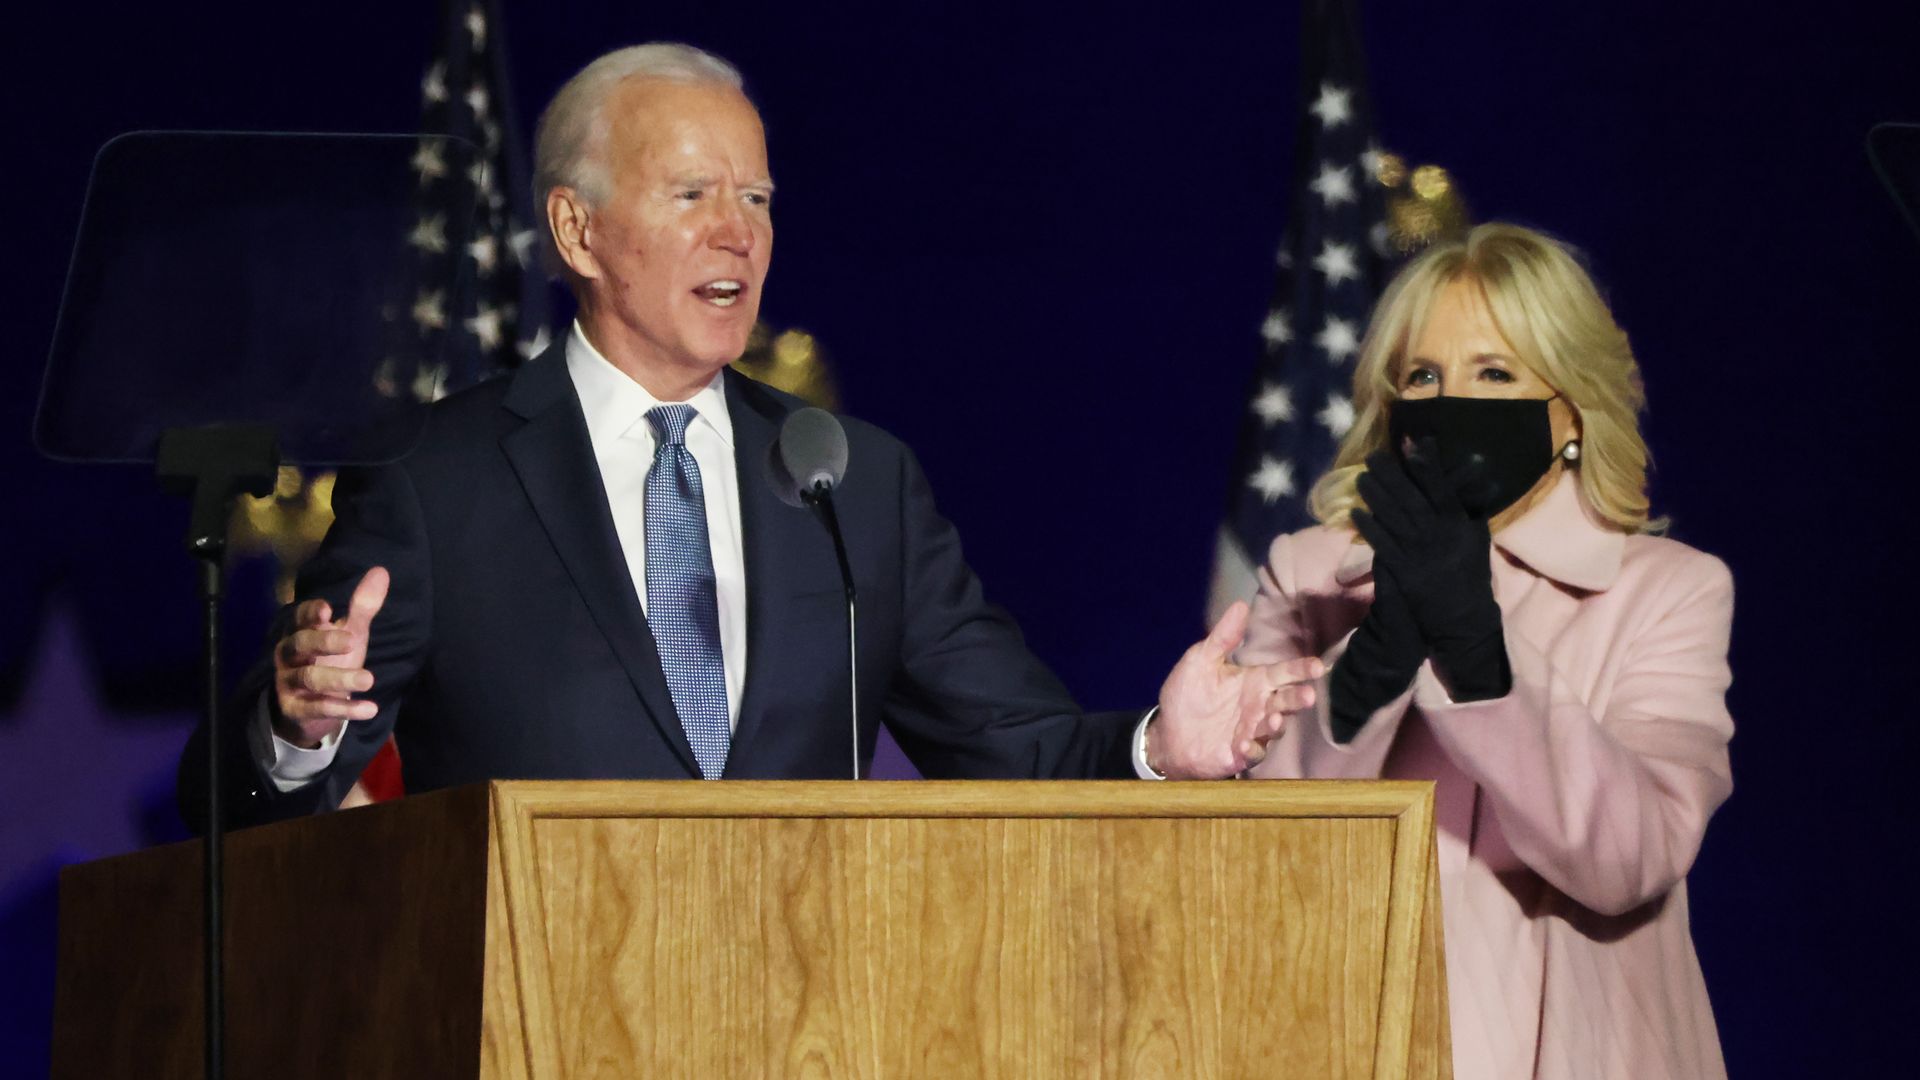 Picture of Joe Biden and his wife, Dr. Jill Biden, in front of a podium